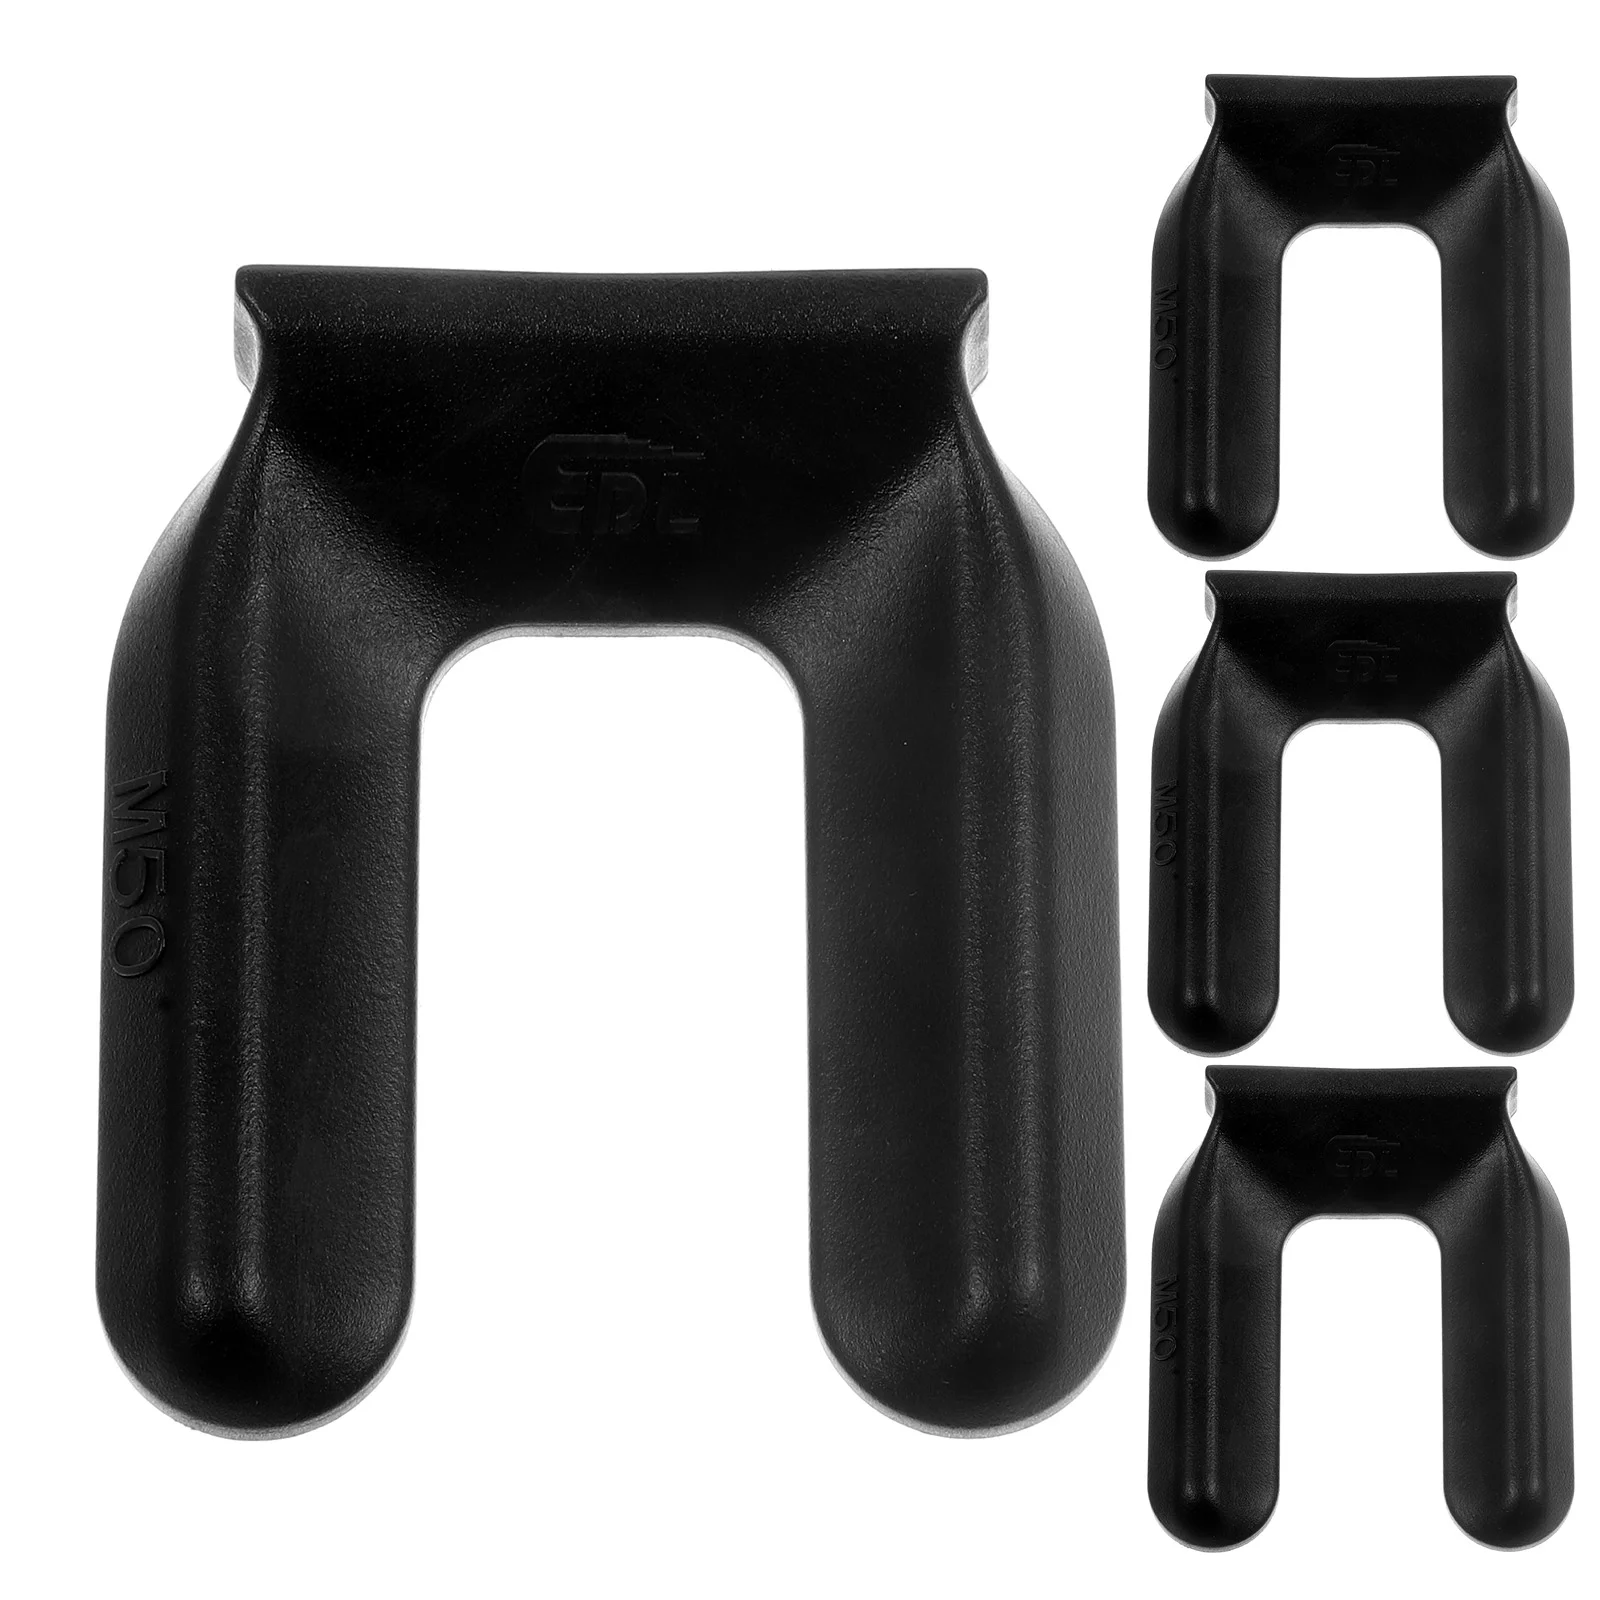 

4 Pcs Sofa Protector Chair Wheel Caps Furniture Universal Stopper Household Caster Plastic Cups Sliders Cushions